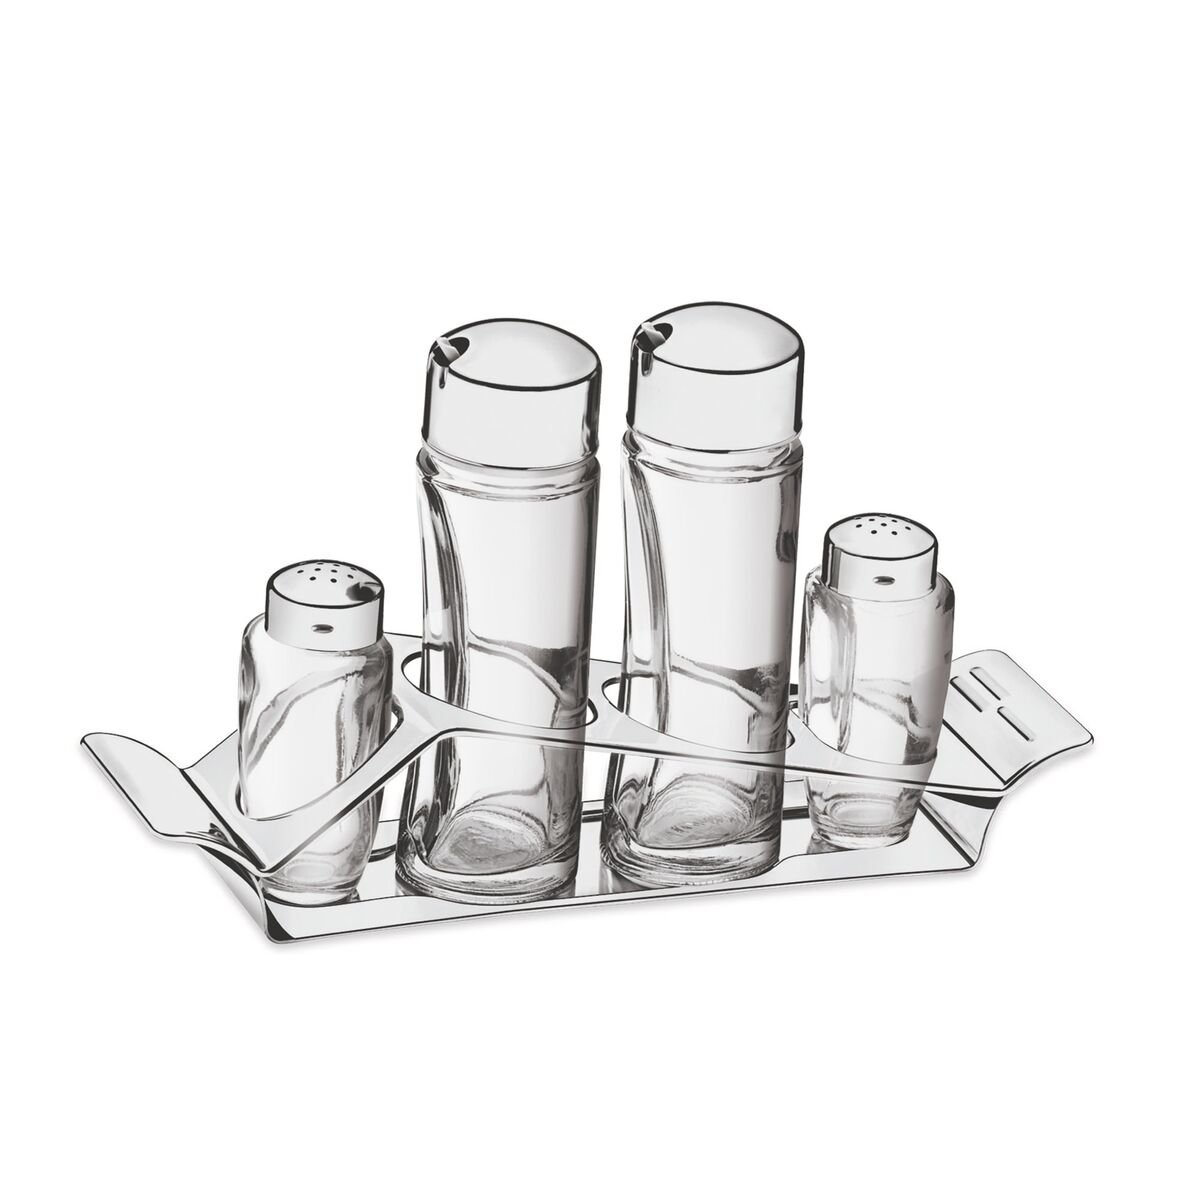 Tramontina Ciclo glass and stainless steel cruet set, 4 pieces